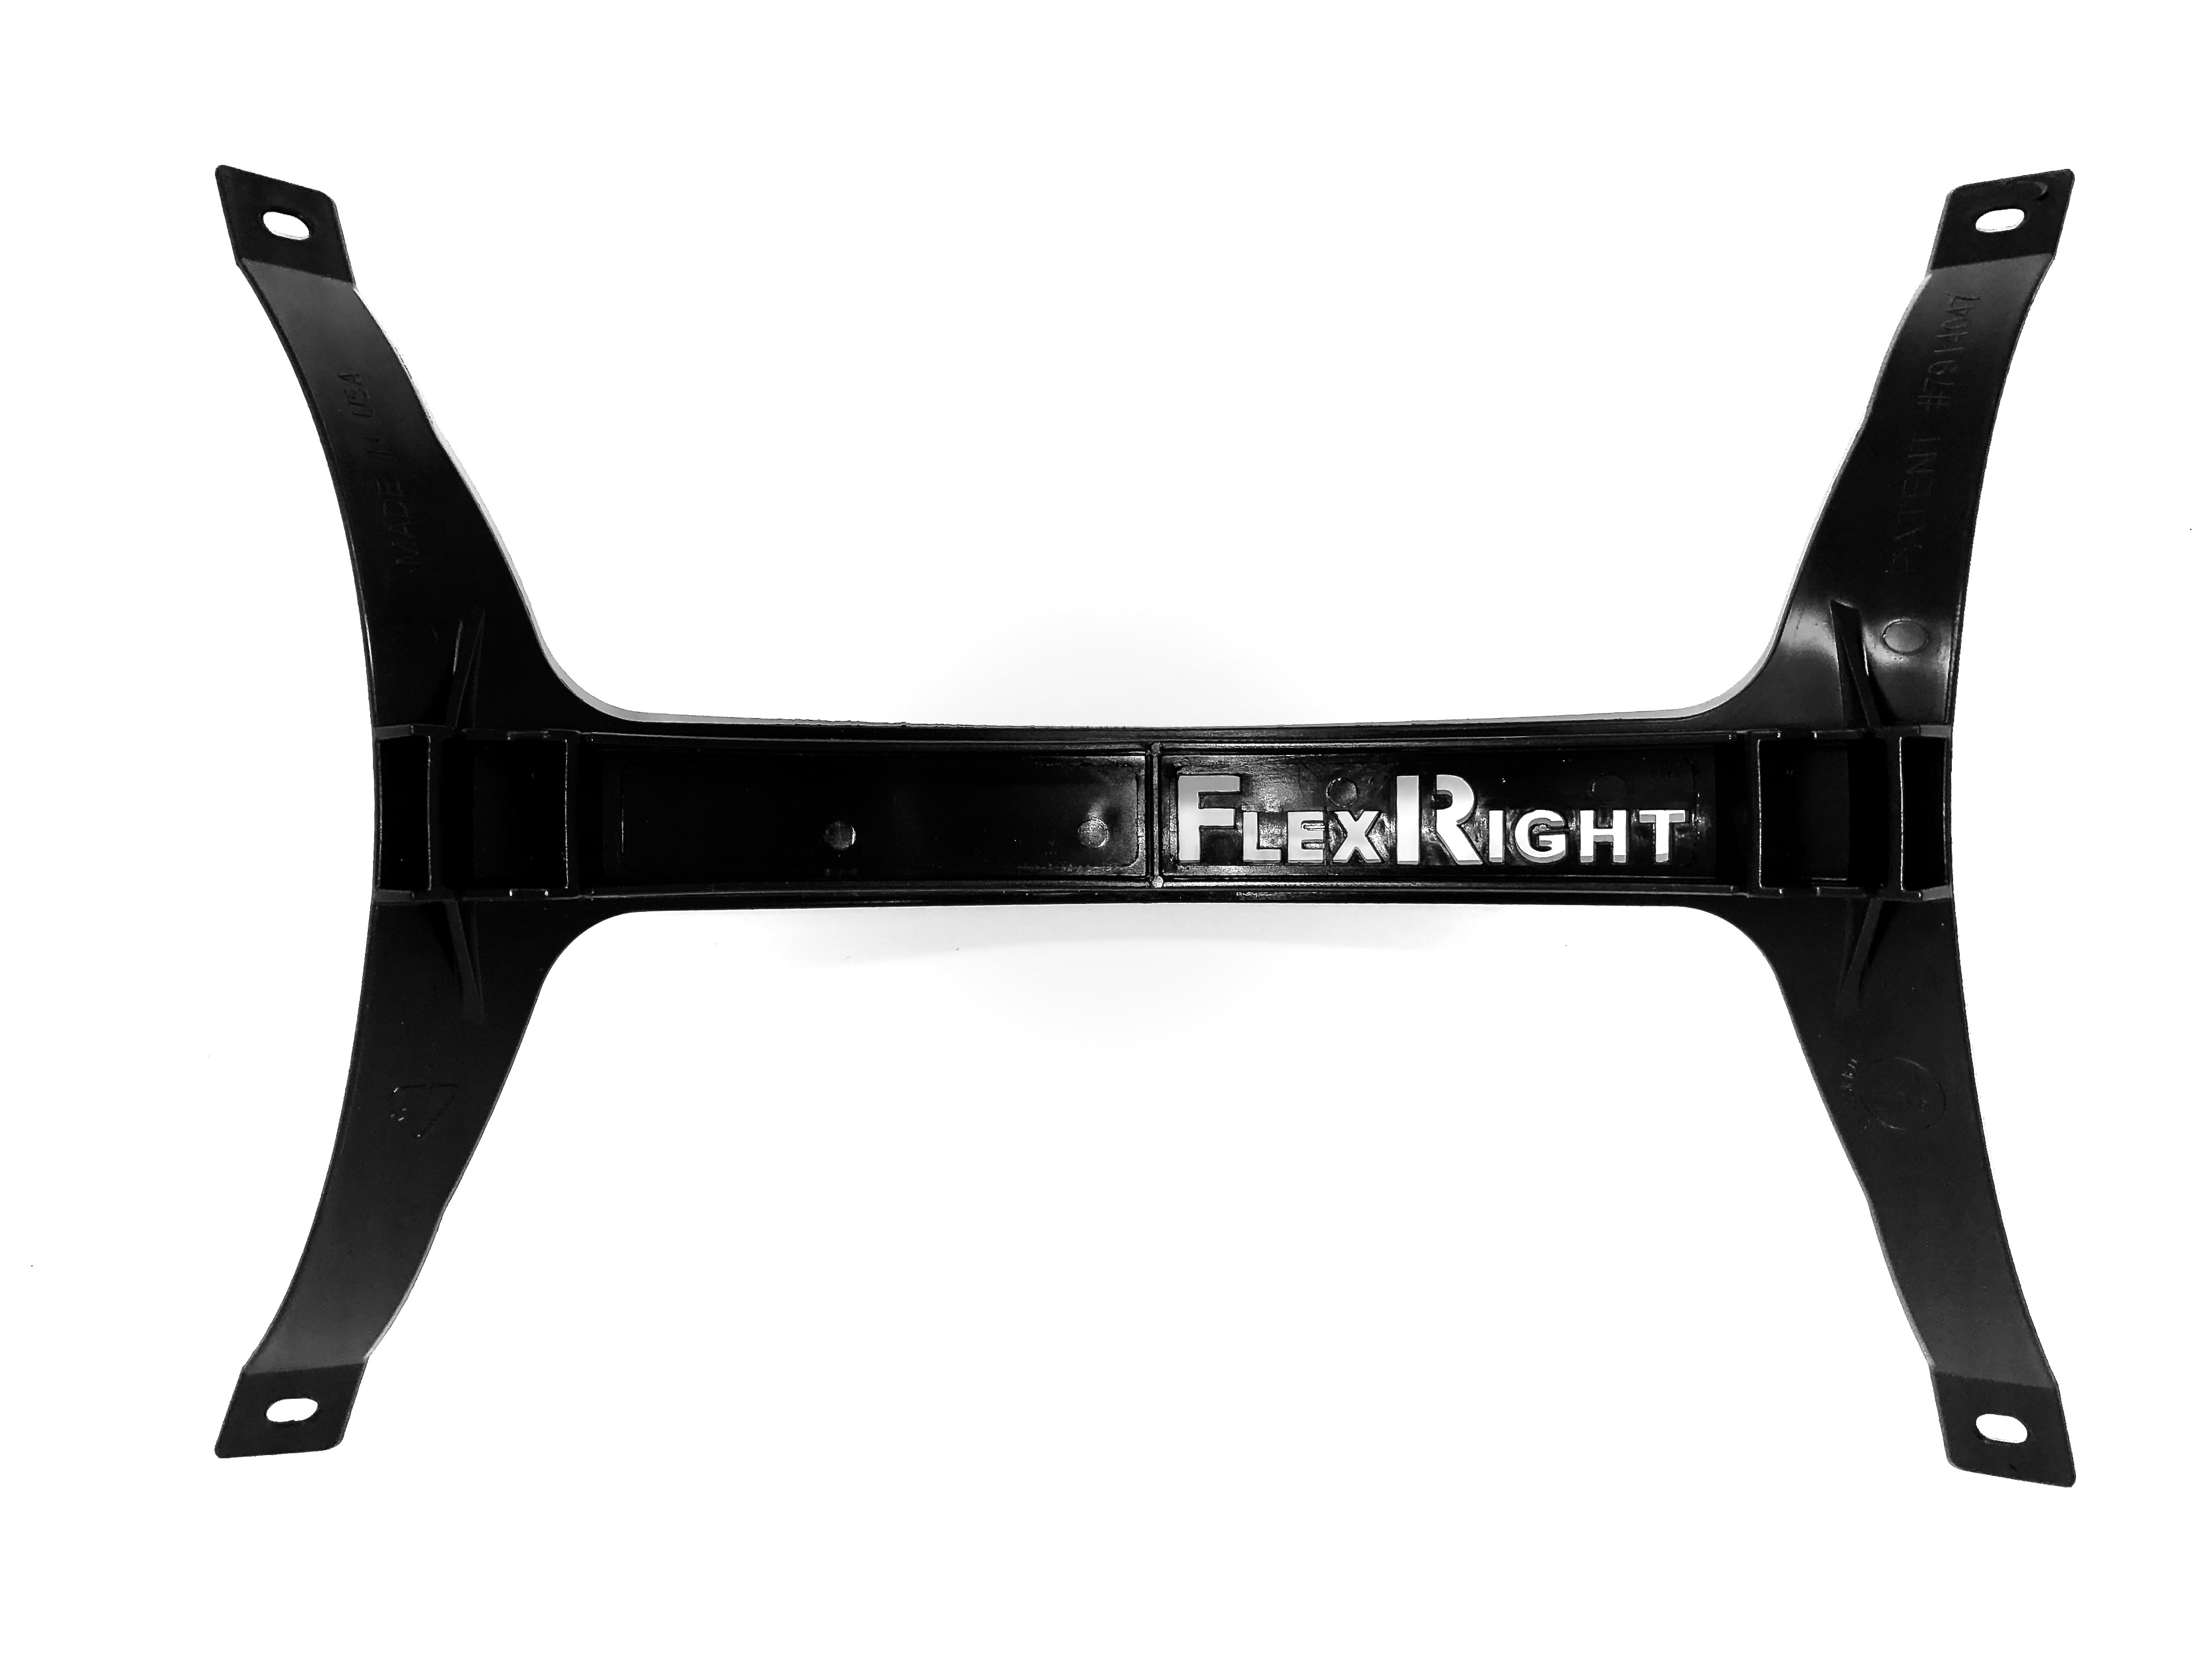 FlexRight – Increase air flow to save energy and improve room comfort